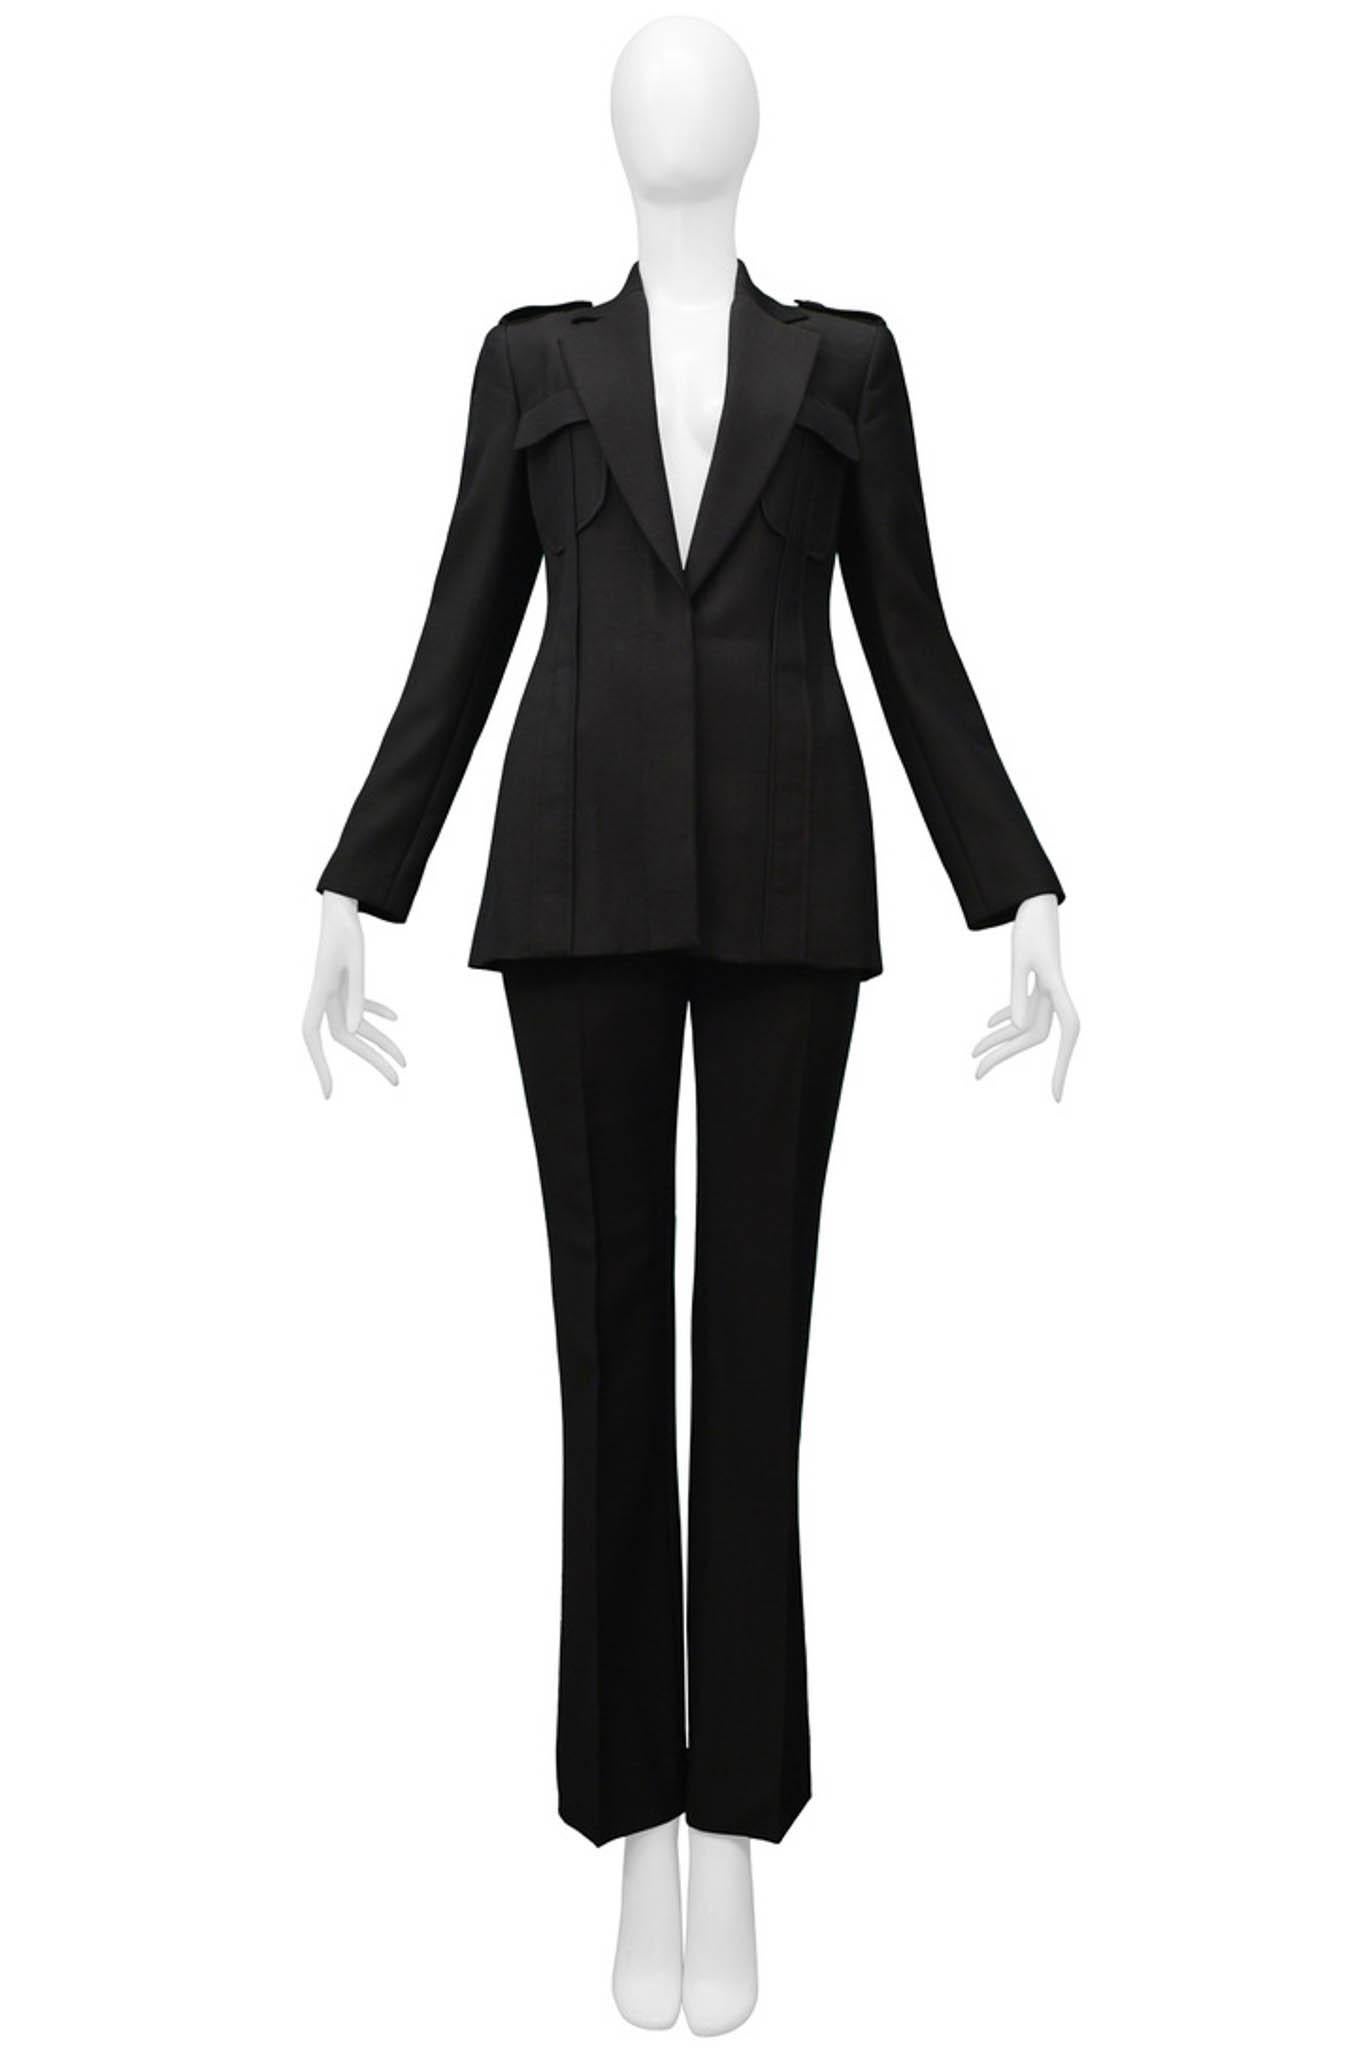 Resurrection Vintage is excited to offer a stunning vintage dark brown Tom Ford for Gucci pantsuit featuring a V-cut fitted blazer, wide lapels, epaulets, and two pockets. The pants feature a high waist and slim legs with a slight flare at the